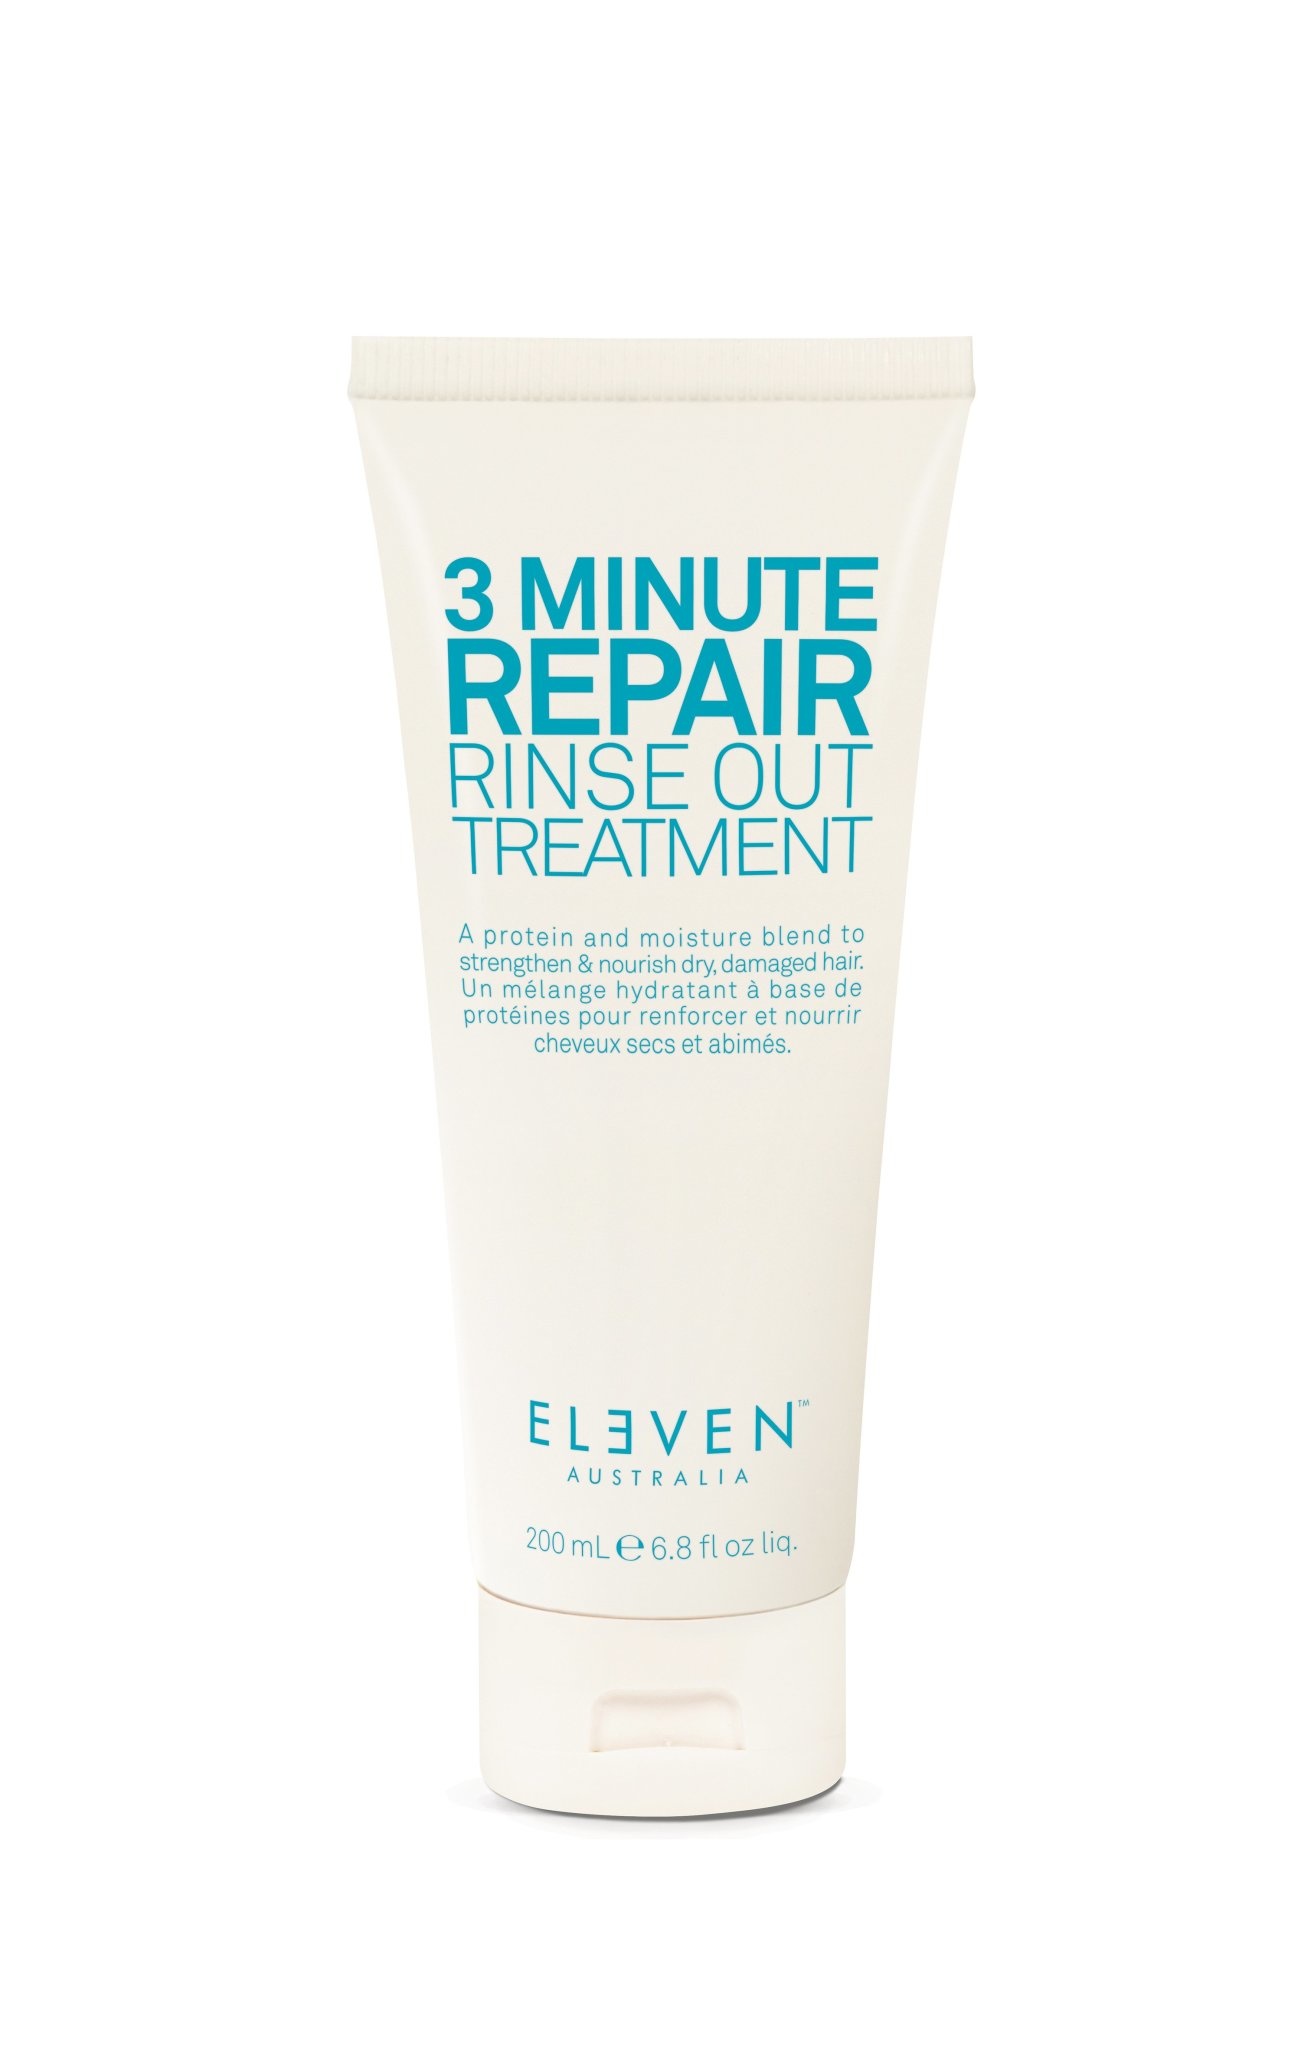 3 MINUTE REPAIR Rince Out Treatment